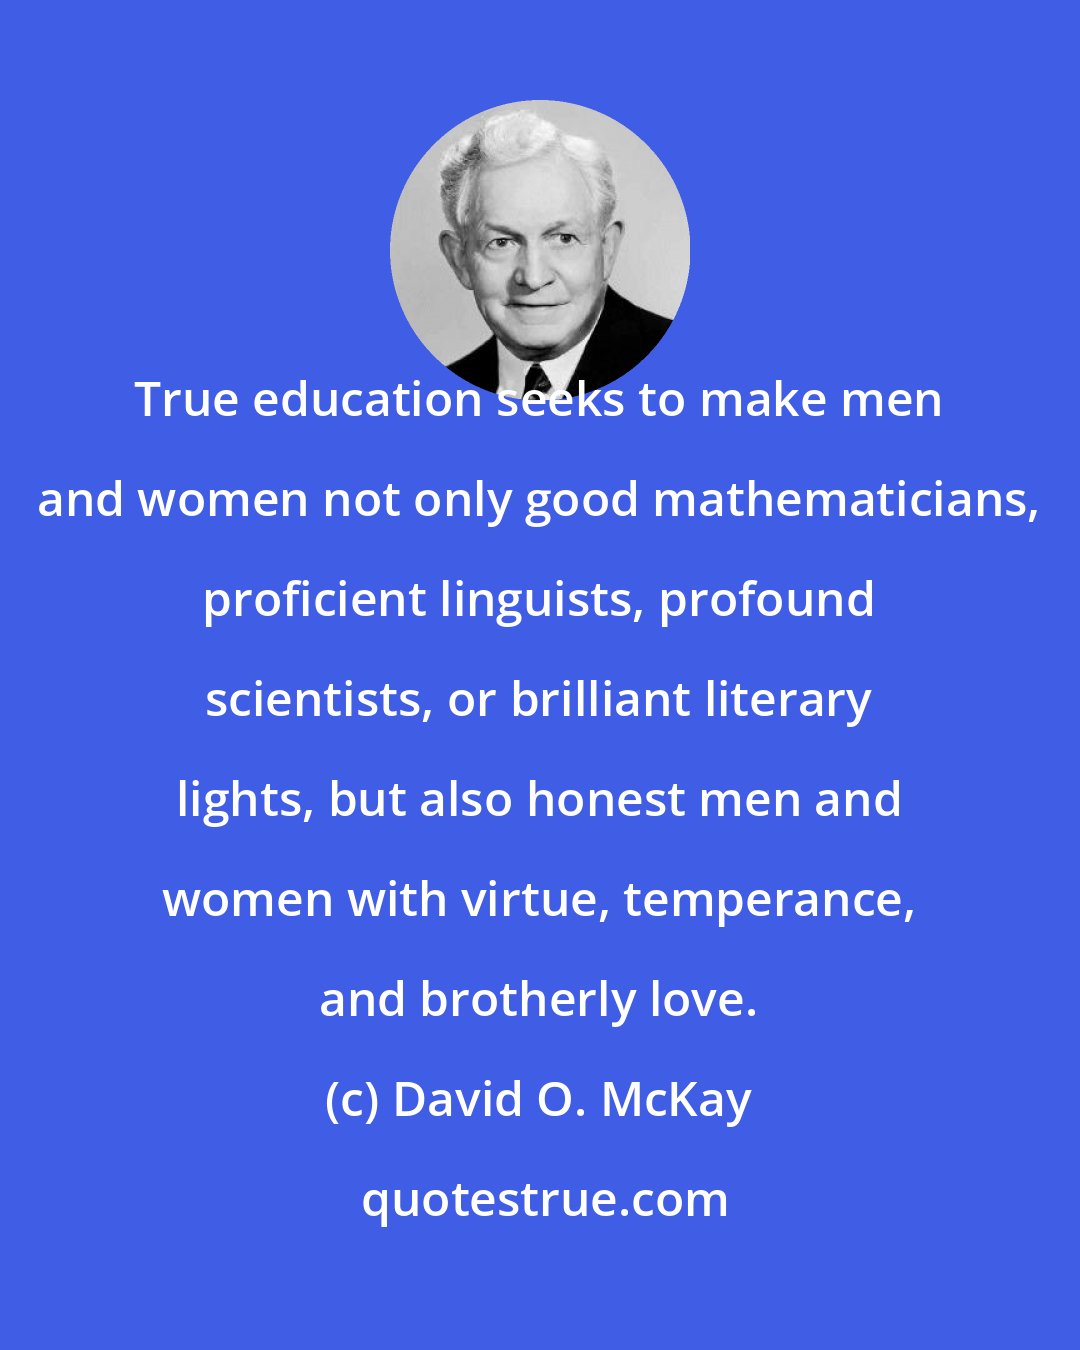 David O. McKay: True education seeks to make men and women not only good mathematicians, proficient linguists, profound scientists, or brilliant literary lights, but also honest men and women with virtue, temperance, and brotherly love.